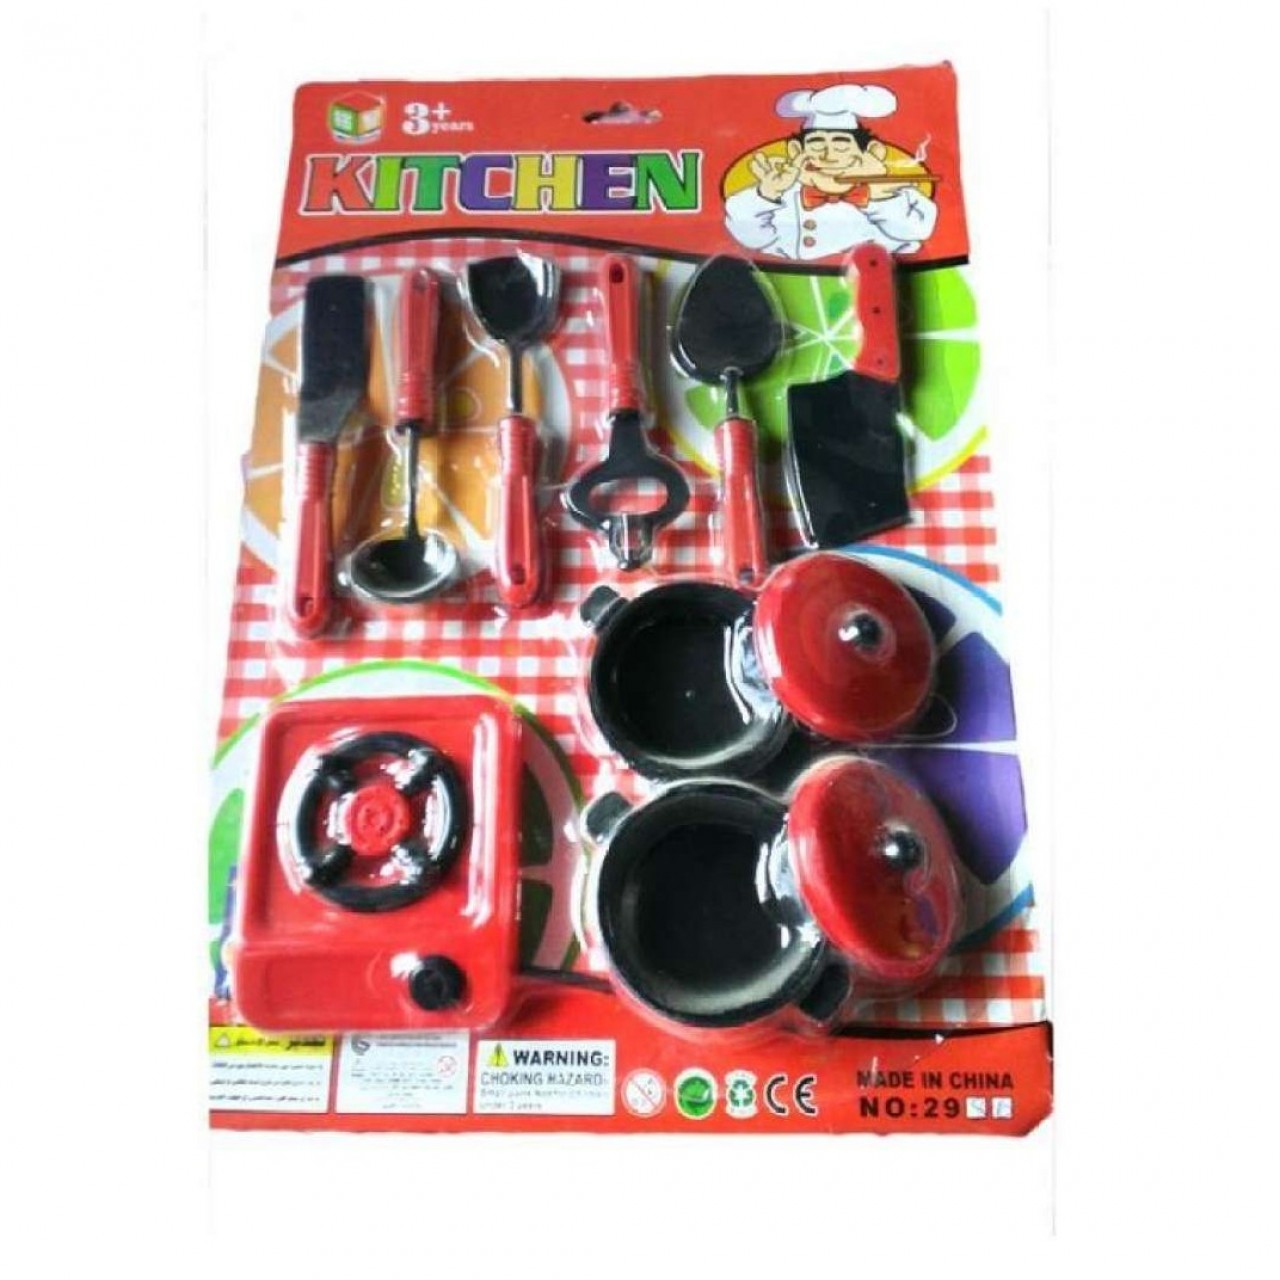 Kitchen Toy Set For Kids - 11 Pcs - Red